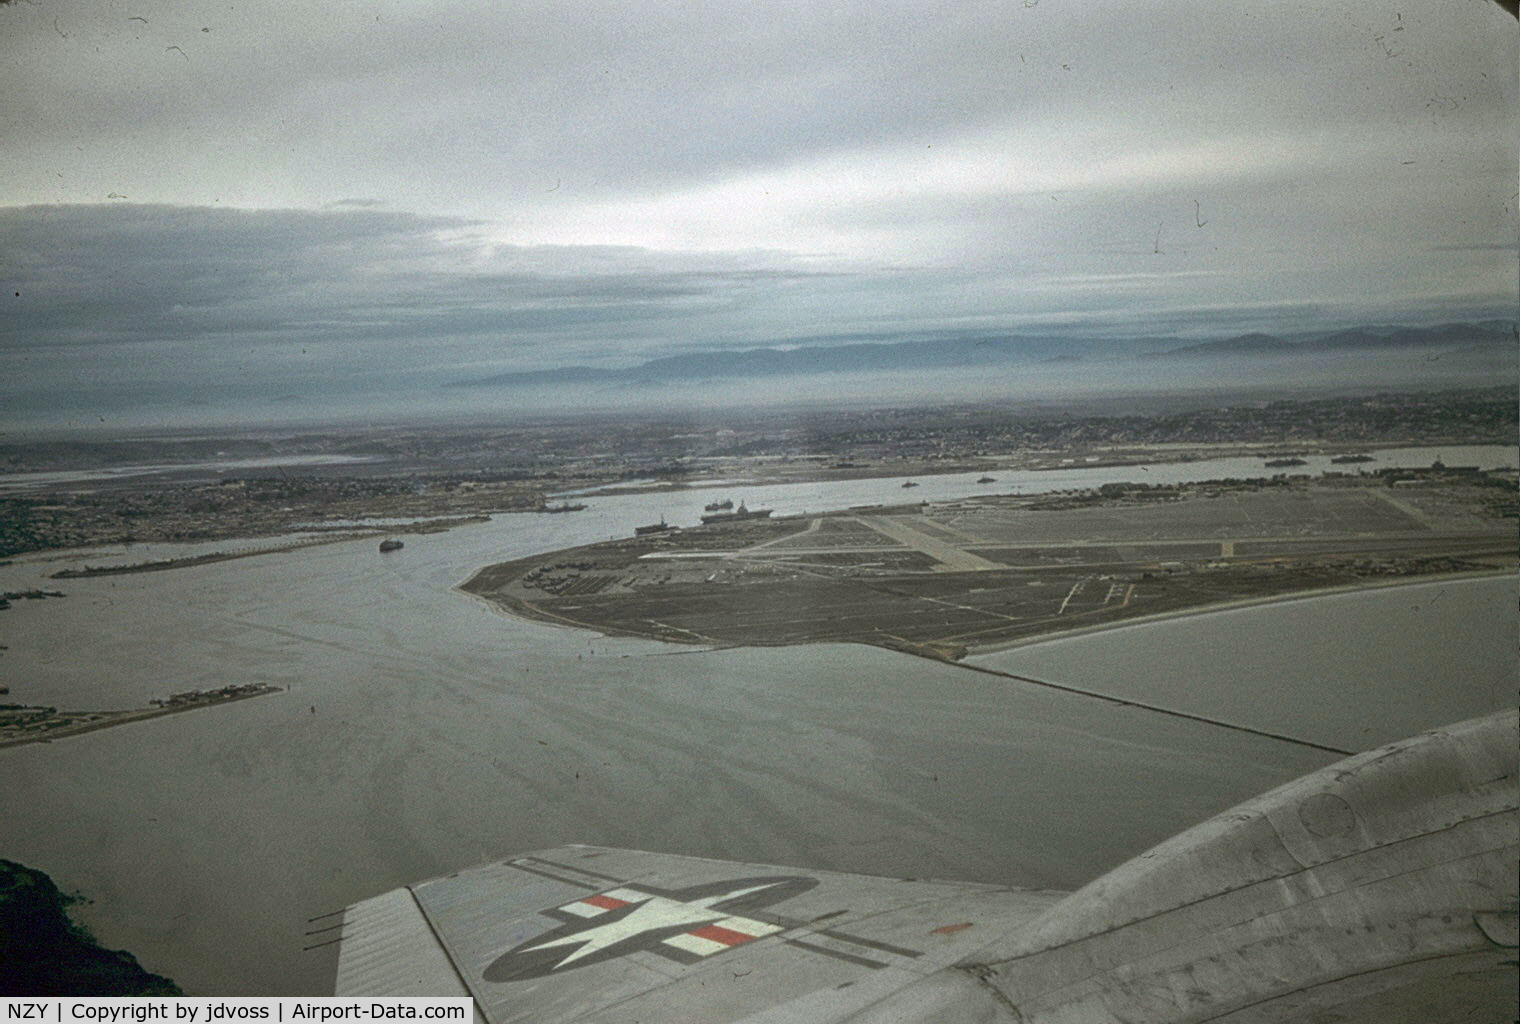 North Island Nas /halsey Field/ Airport (NZY) - Photo taken from C-54 (R5D) from VR-776 of NAS Los Alamitos 